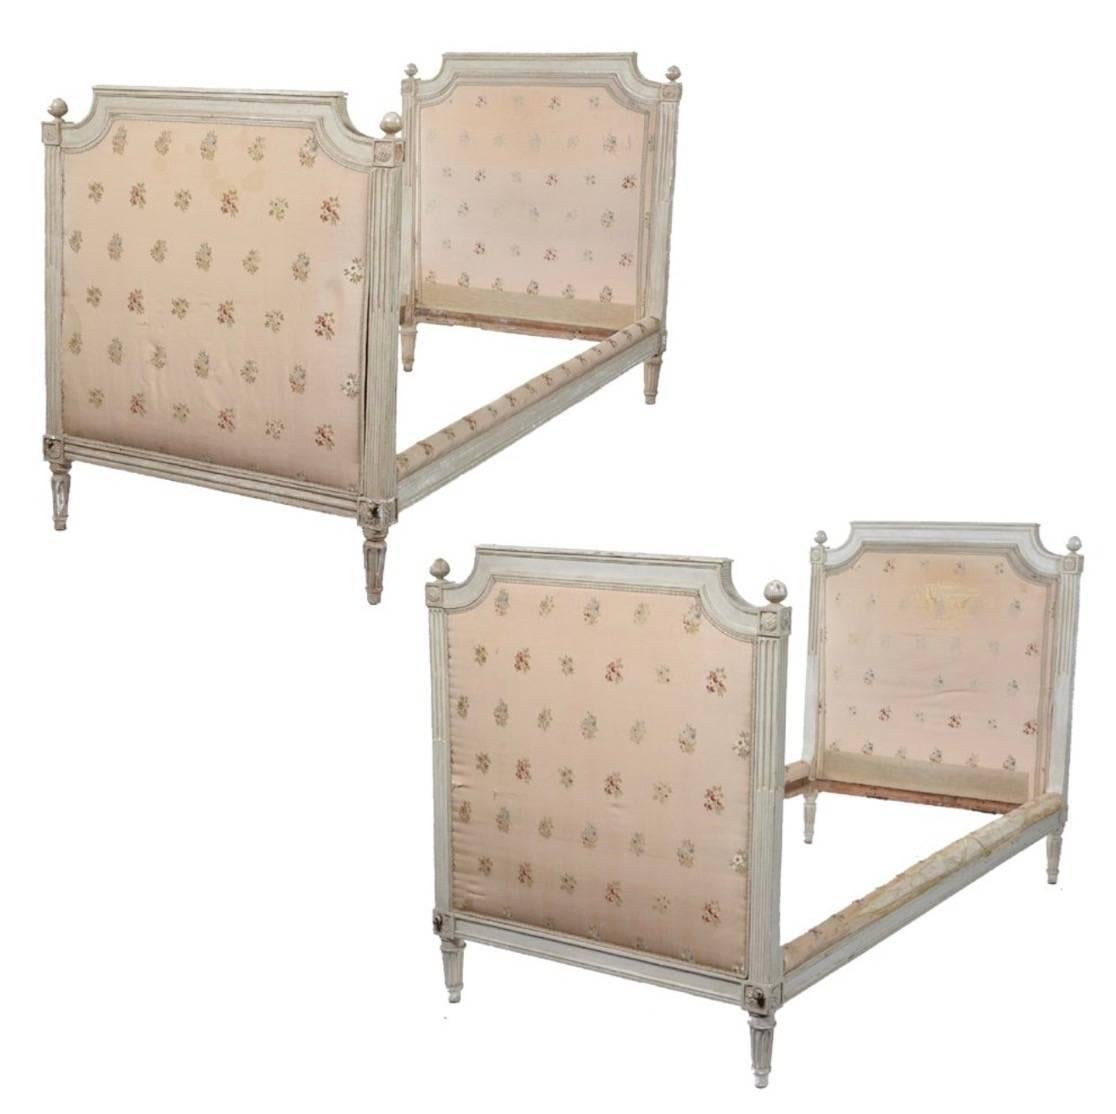 Pair of Hand-Carved French Louis XVI Beds by J.B. Boulard Original Paint, 1700s For Sale